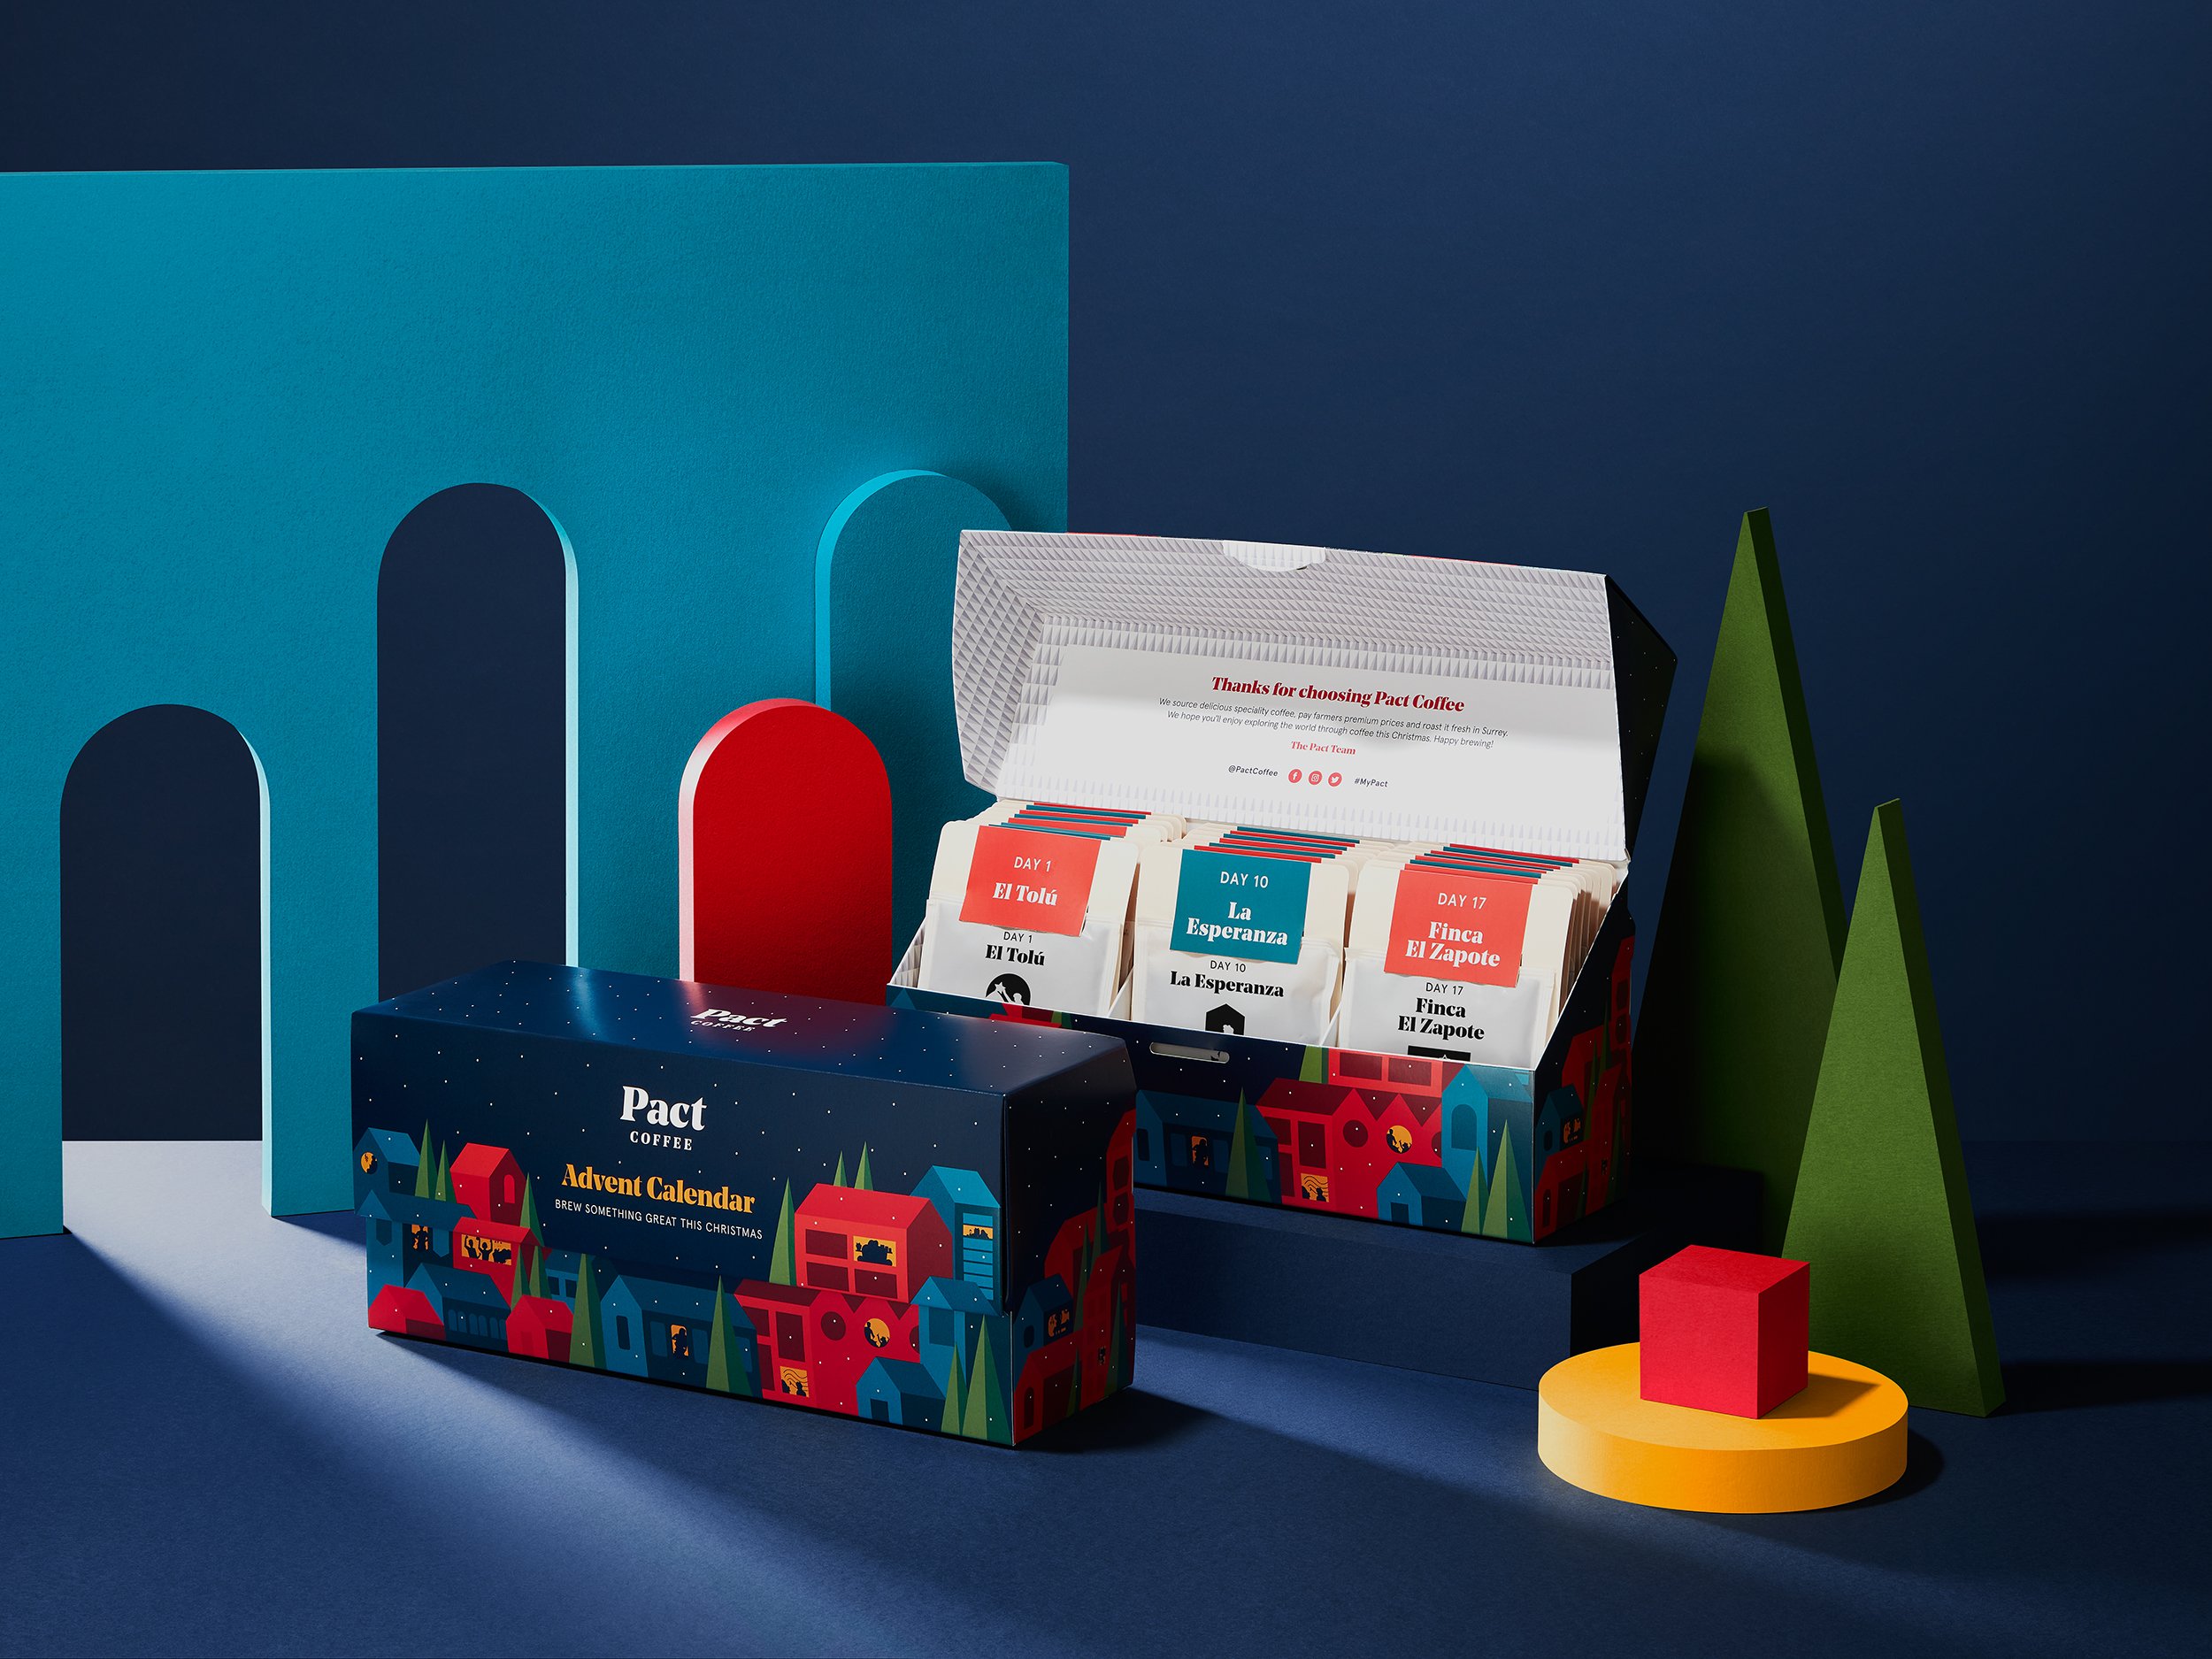 Pact Coffee Advent Box, V60, Bialetti and Aeropress - Product photography by Simon Lyle Ritchie